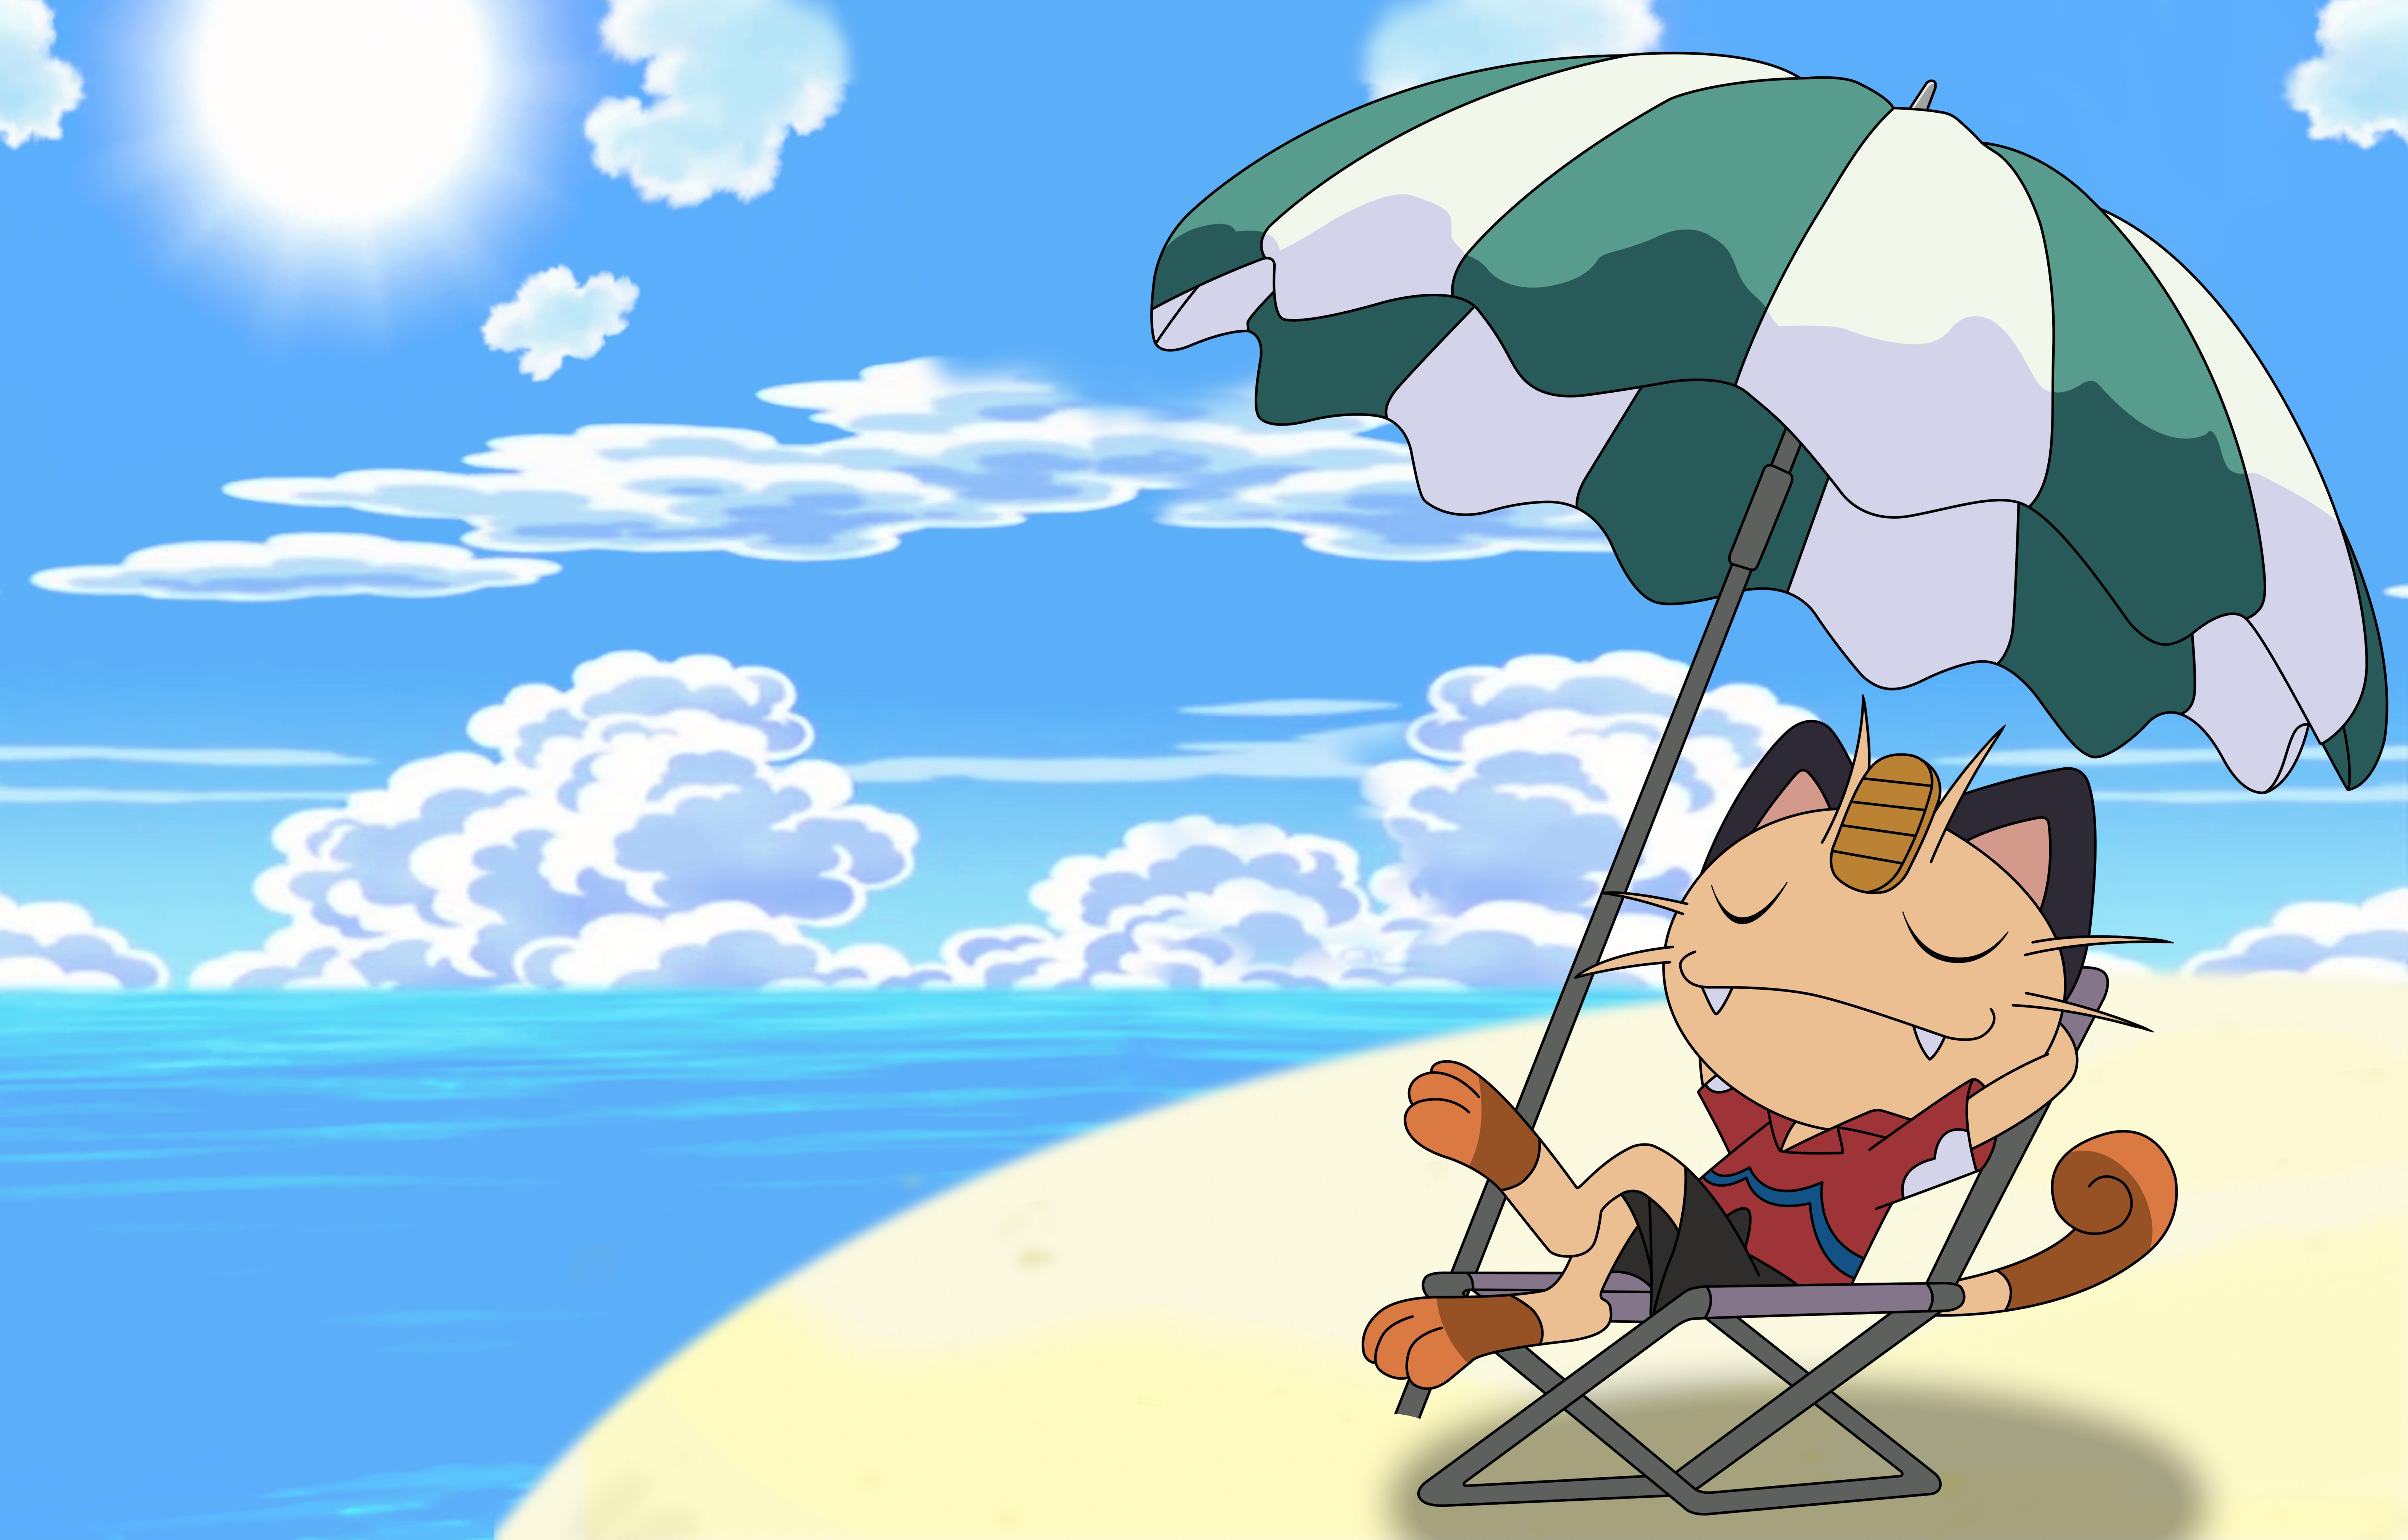 Meowth Wallpaper Full HD Pictures